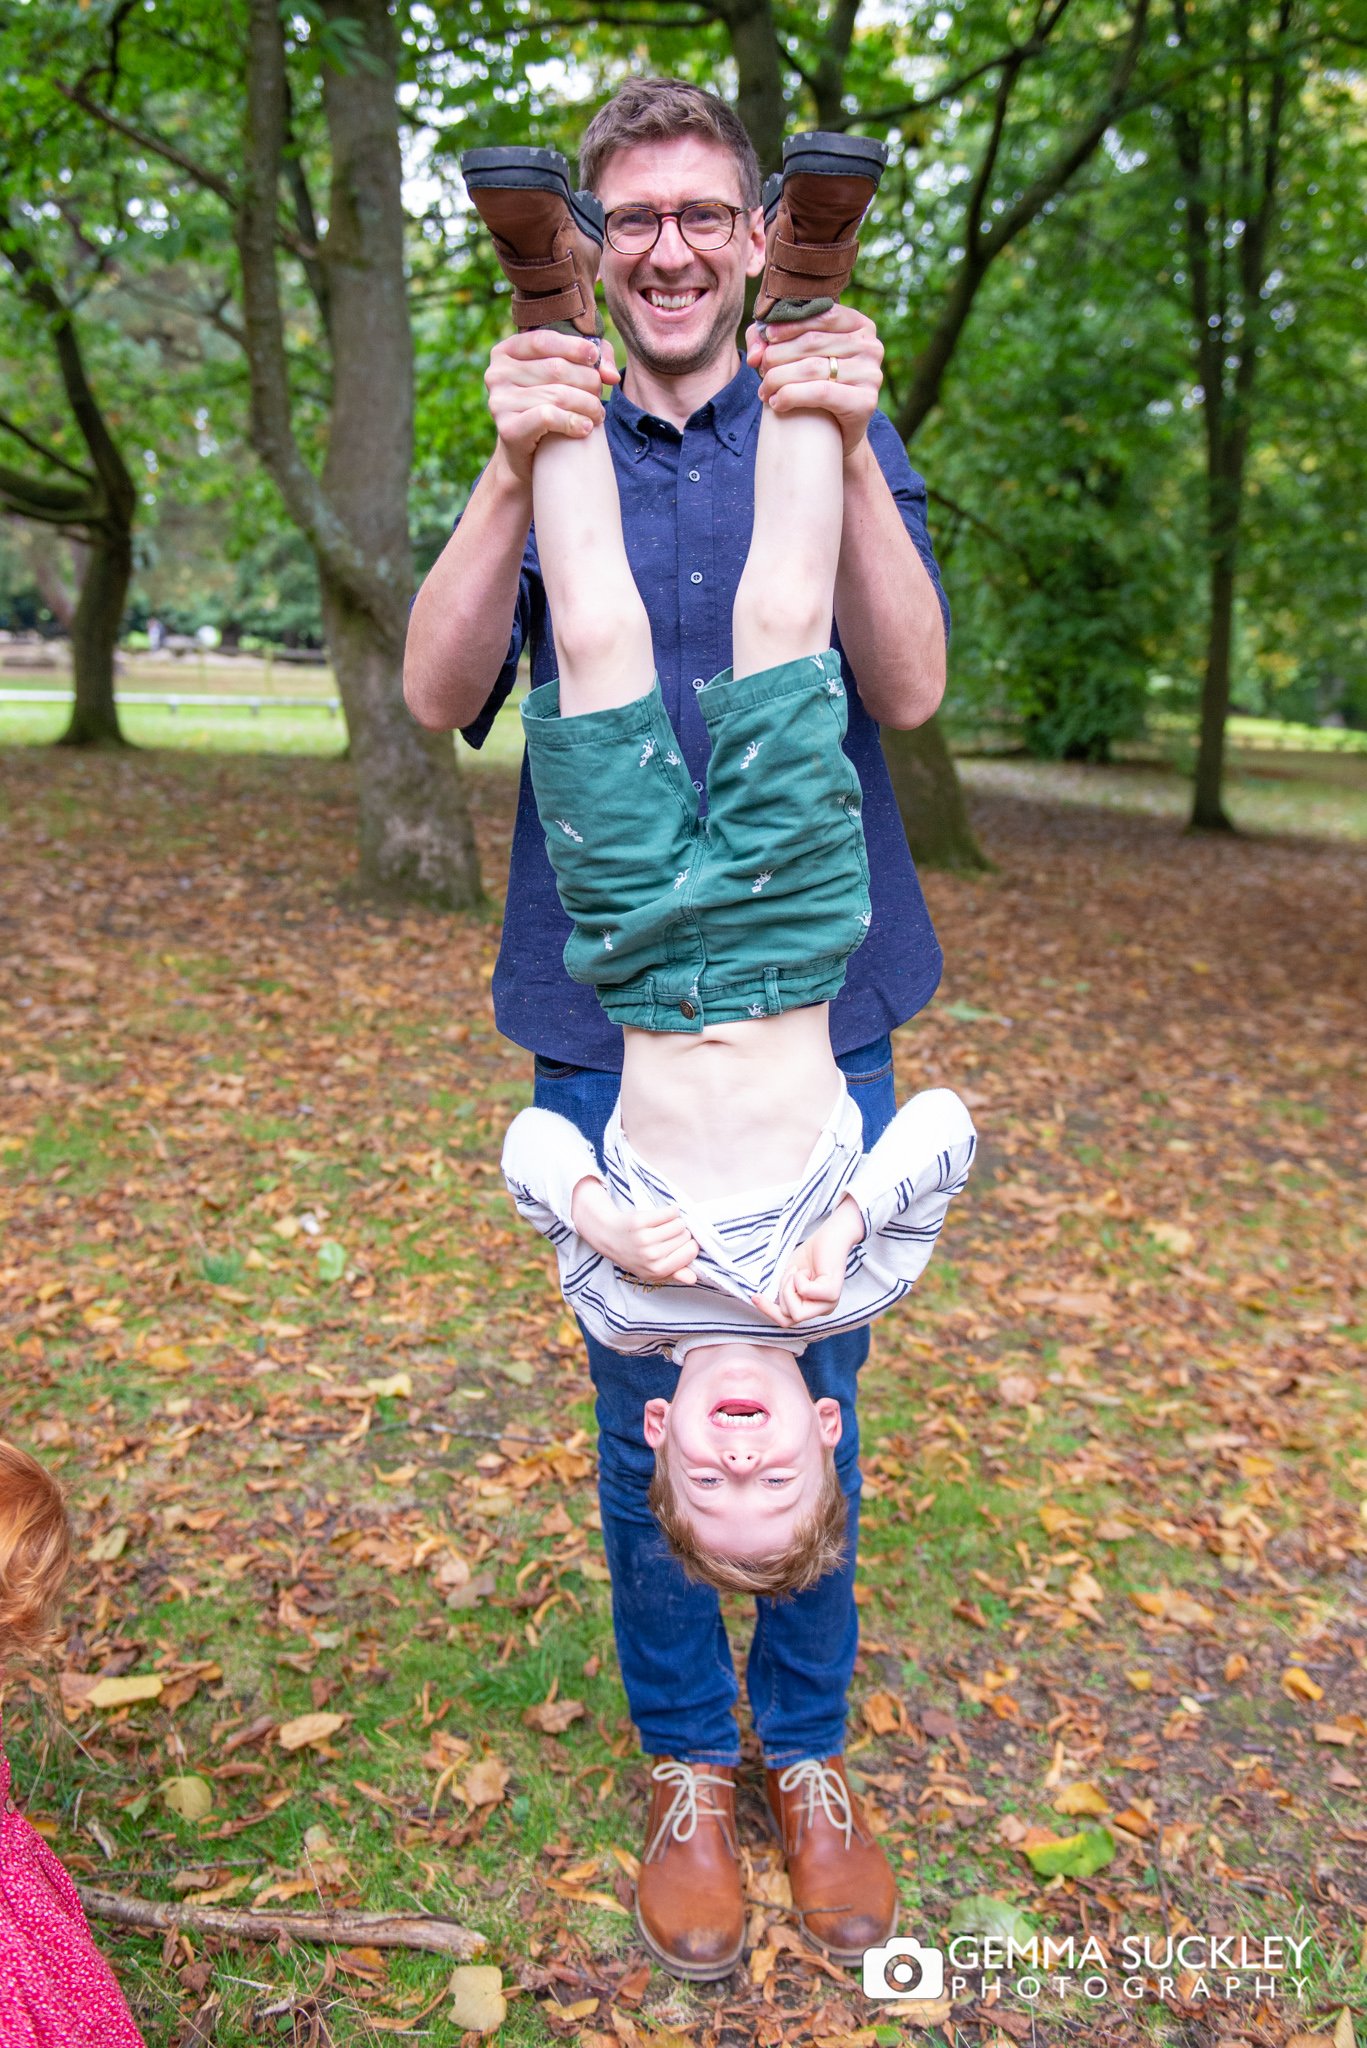 a dad holding his son upside down for a photo at st ives park in bingley